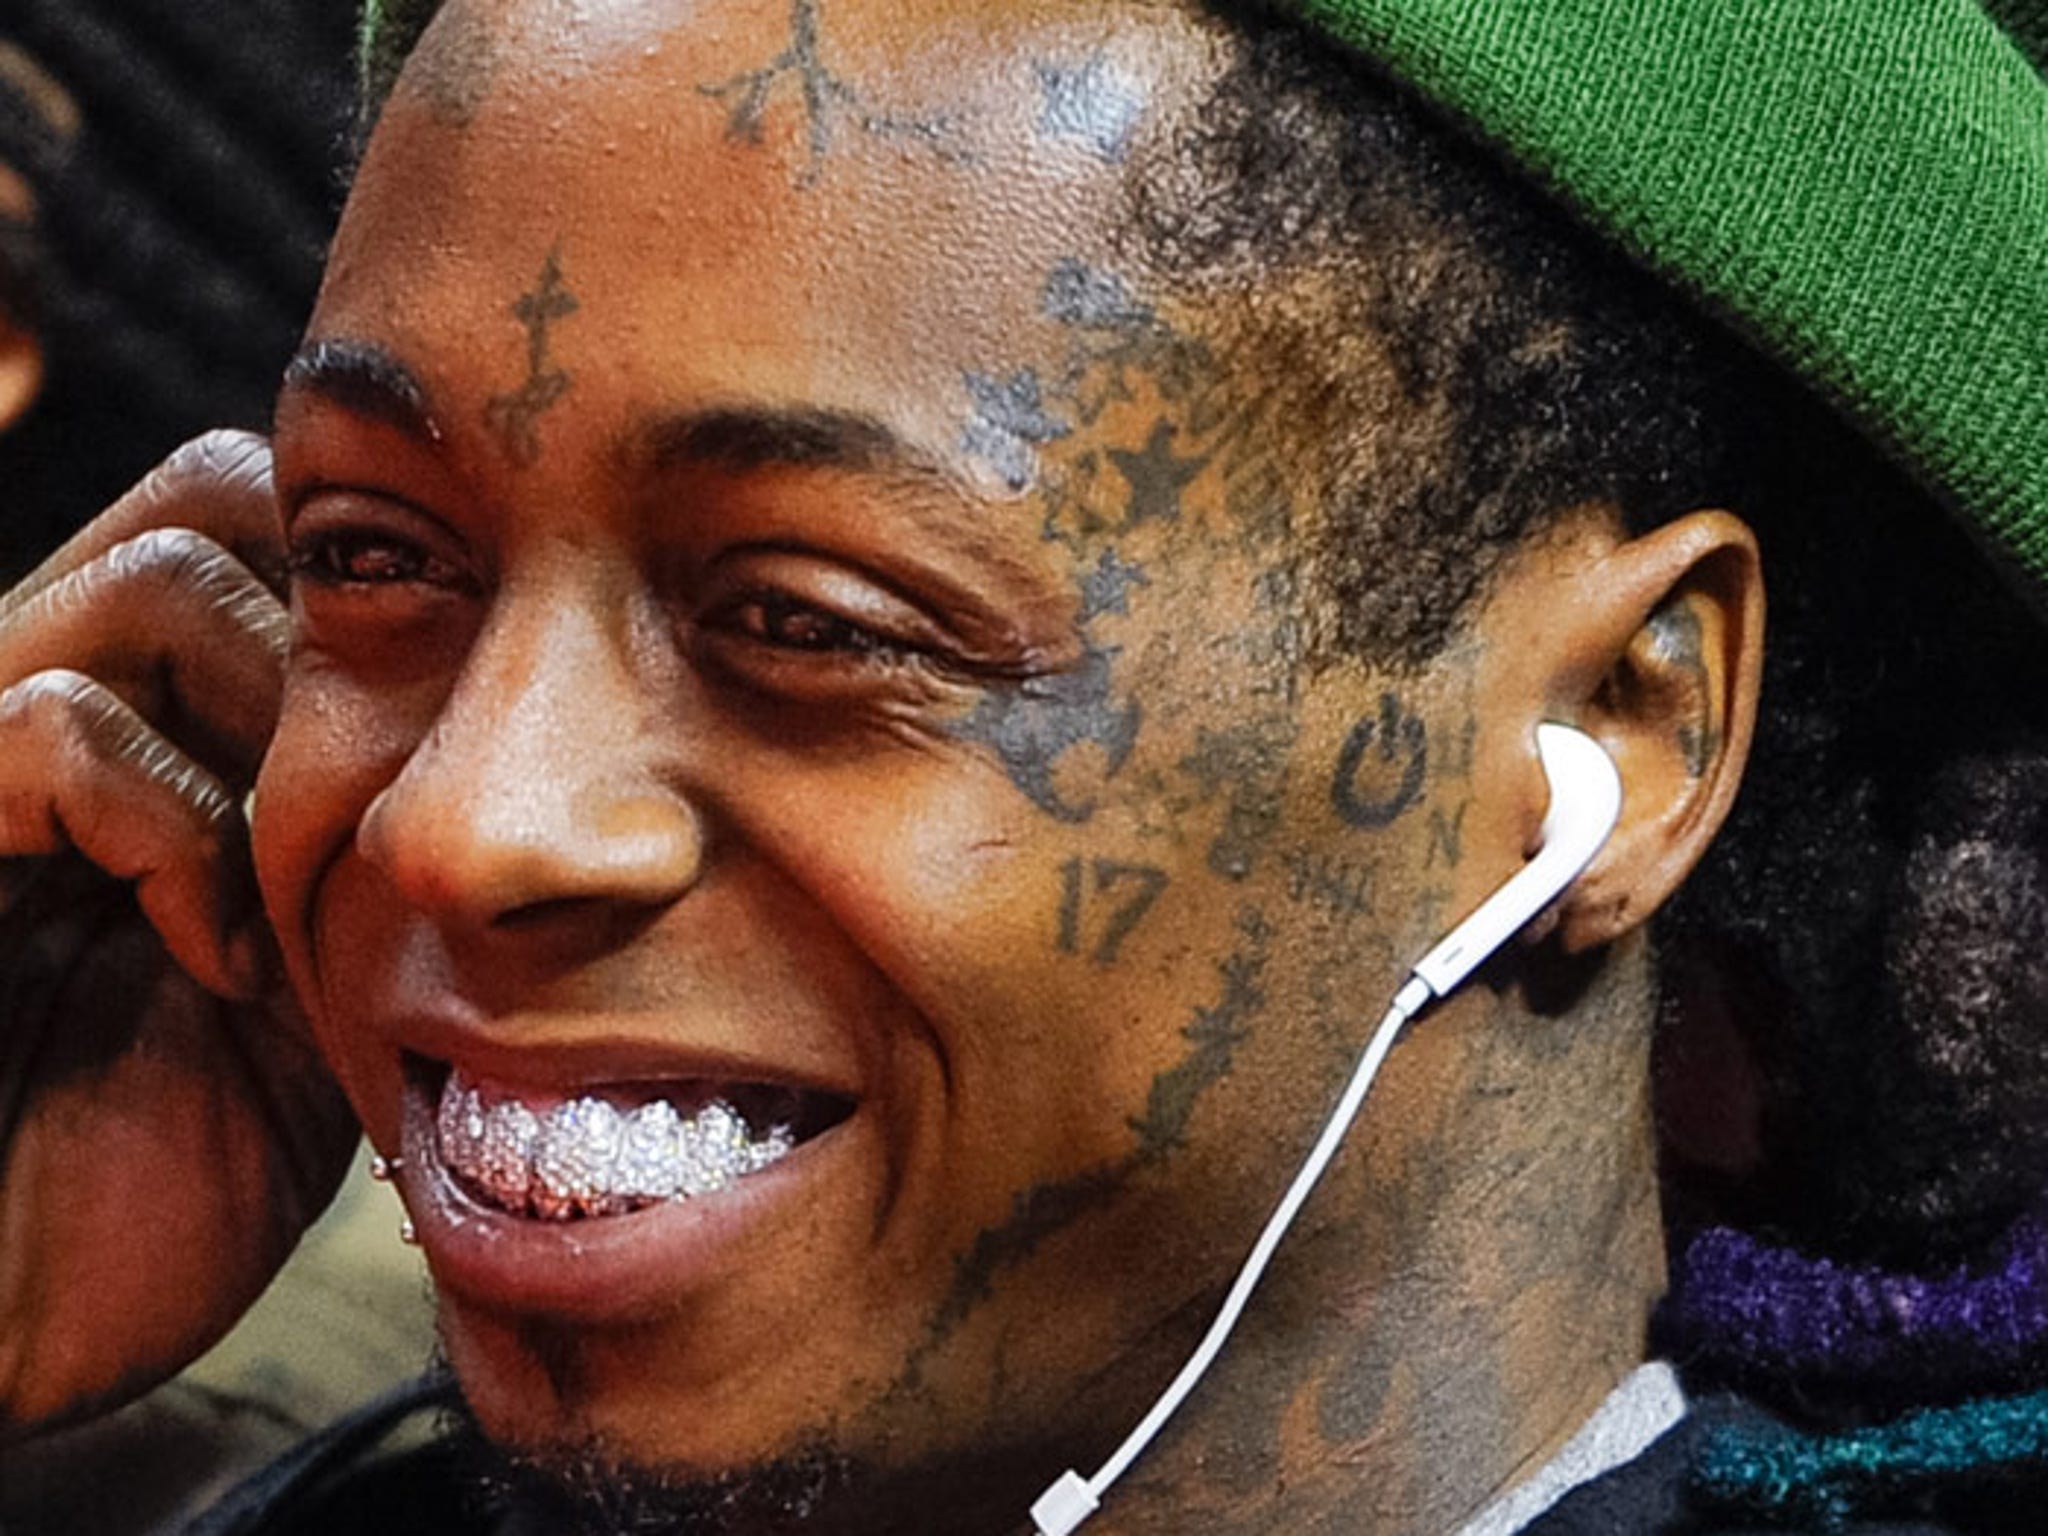 Lil Wayne Photoshop Makeover  Removing Tattoos Hair  Piercings  YouTube